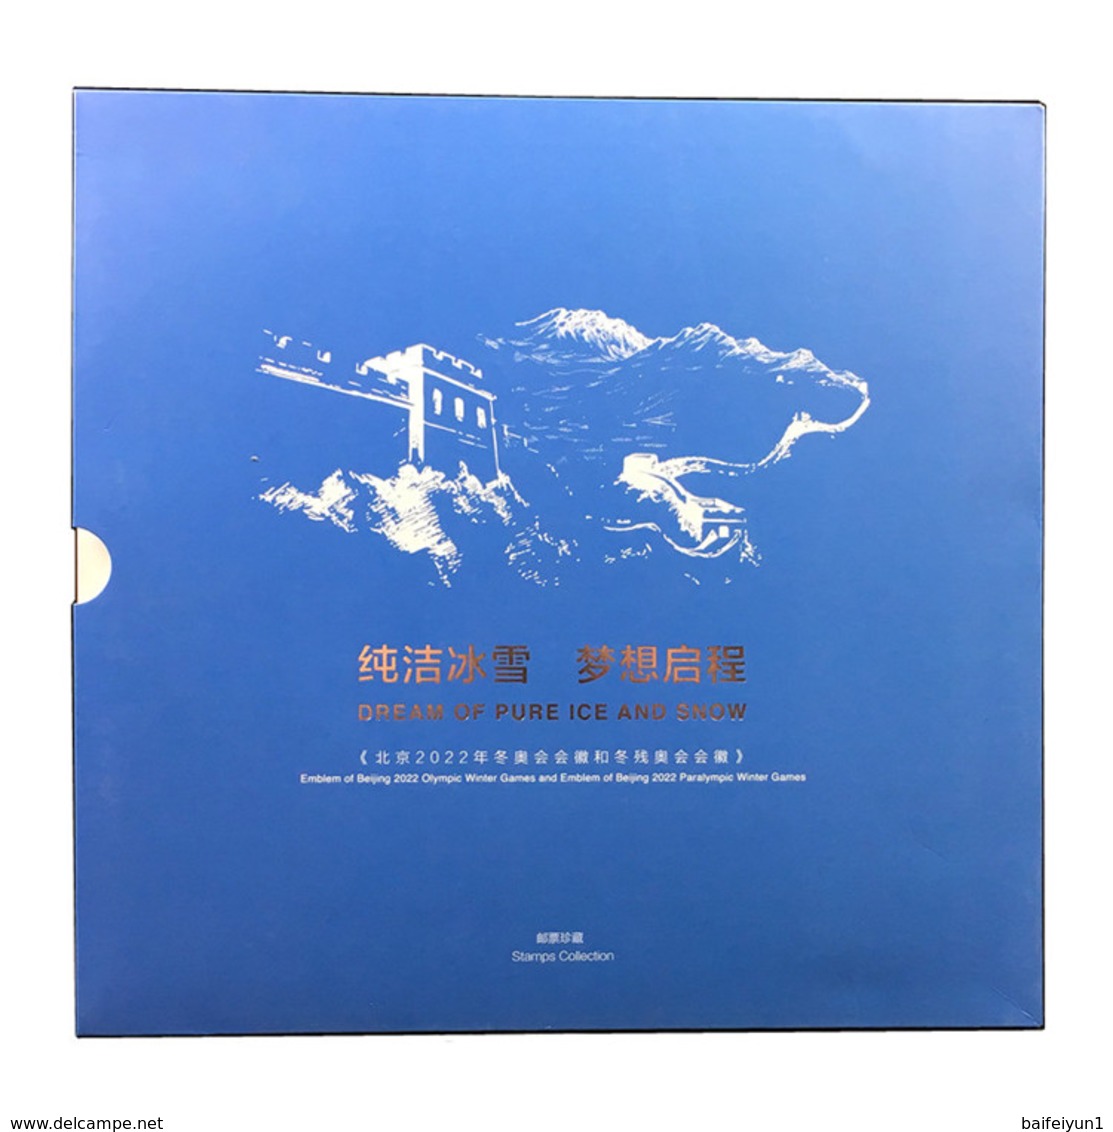 China 2017-31 Emble Of BeiJing 2022 Olympic Winter Game And Emble Of BeiJing 2022 Paralympic Winter Game  Folder - Winter 2022: Beijing